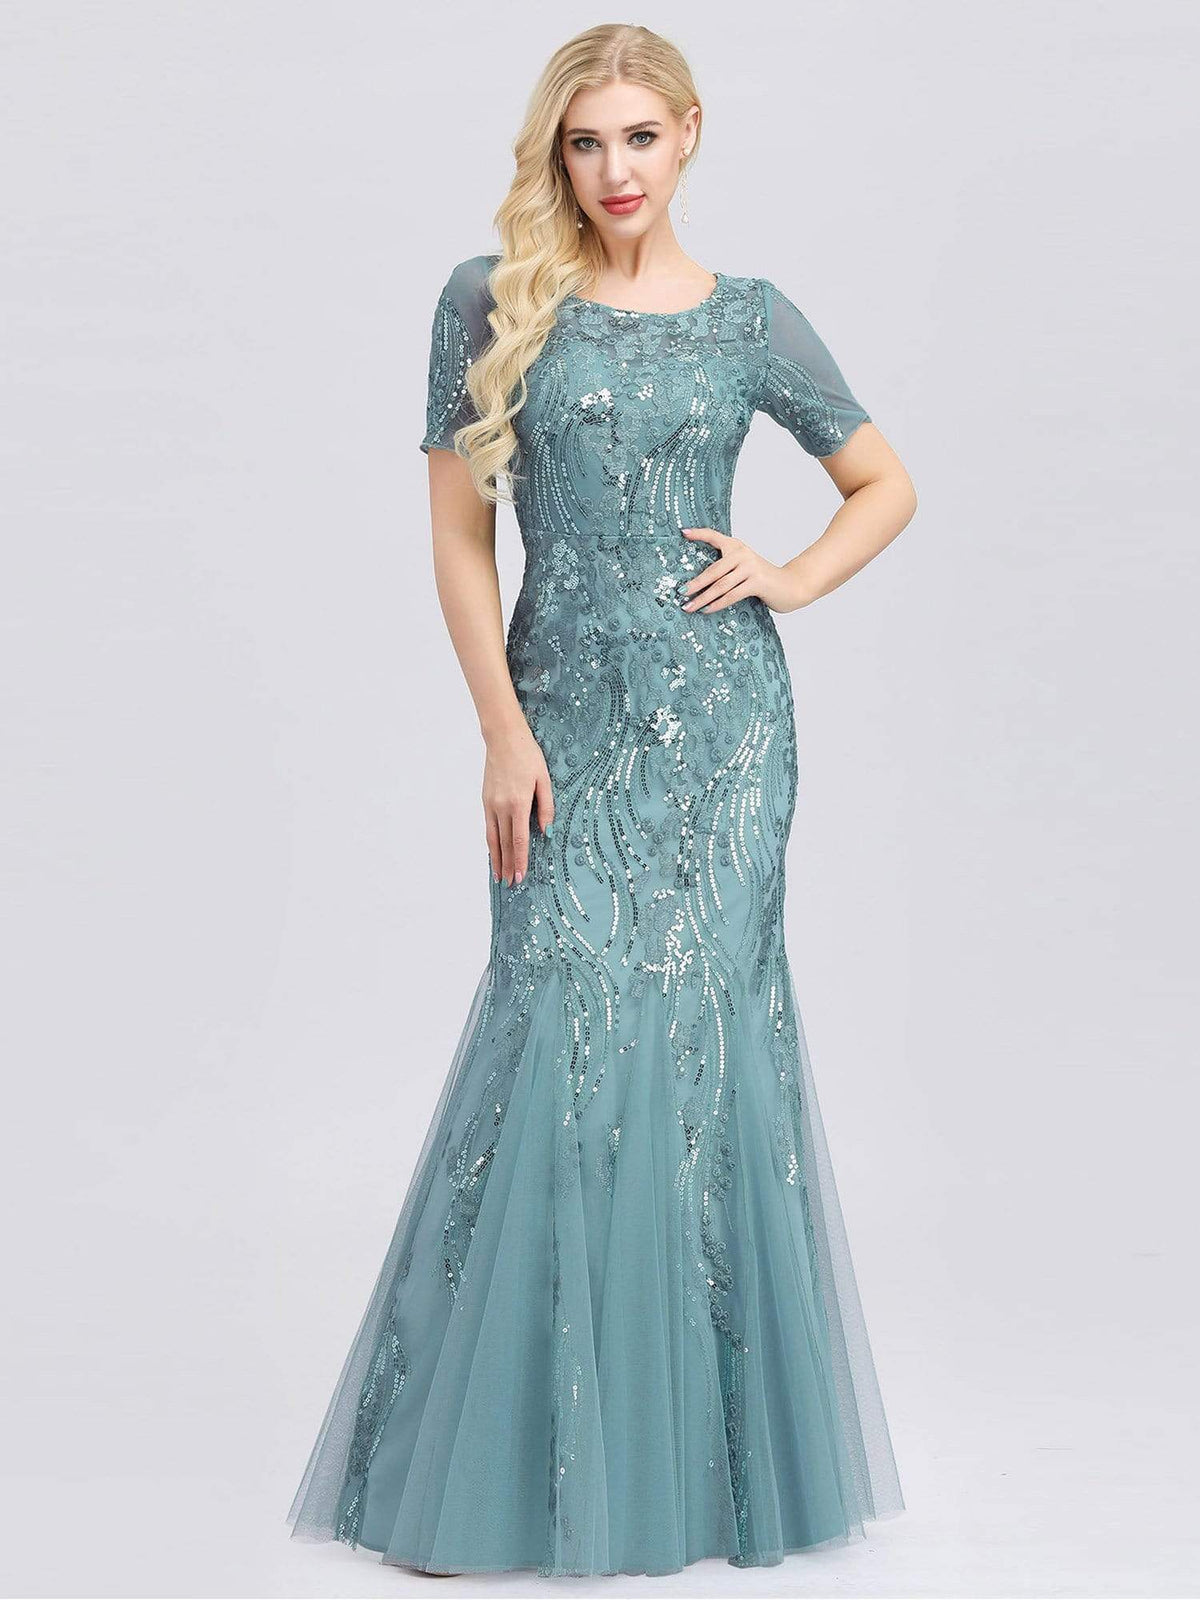 Full Embroidery Sequin Mermaid Evening Dress with Sleeves